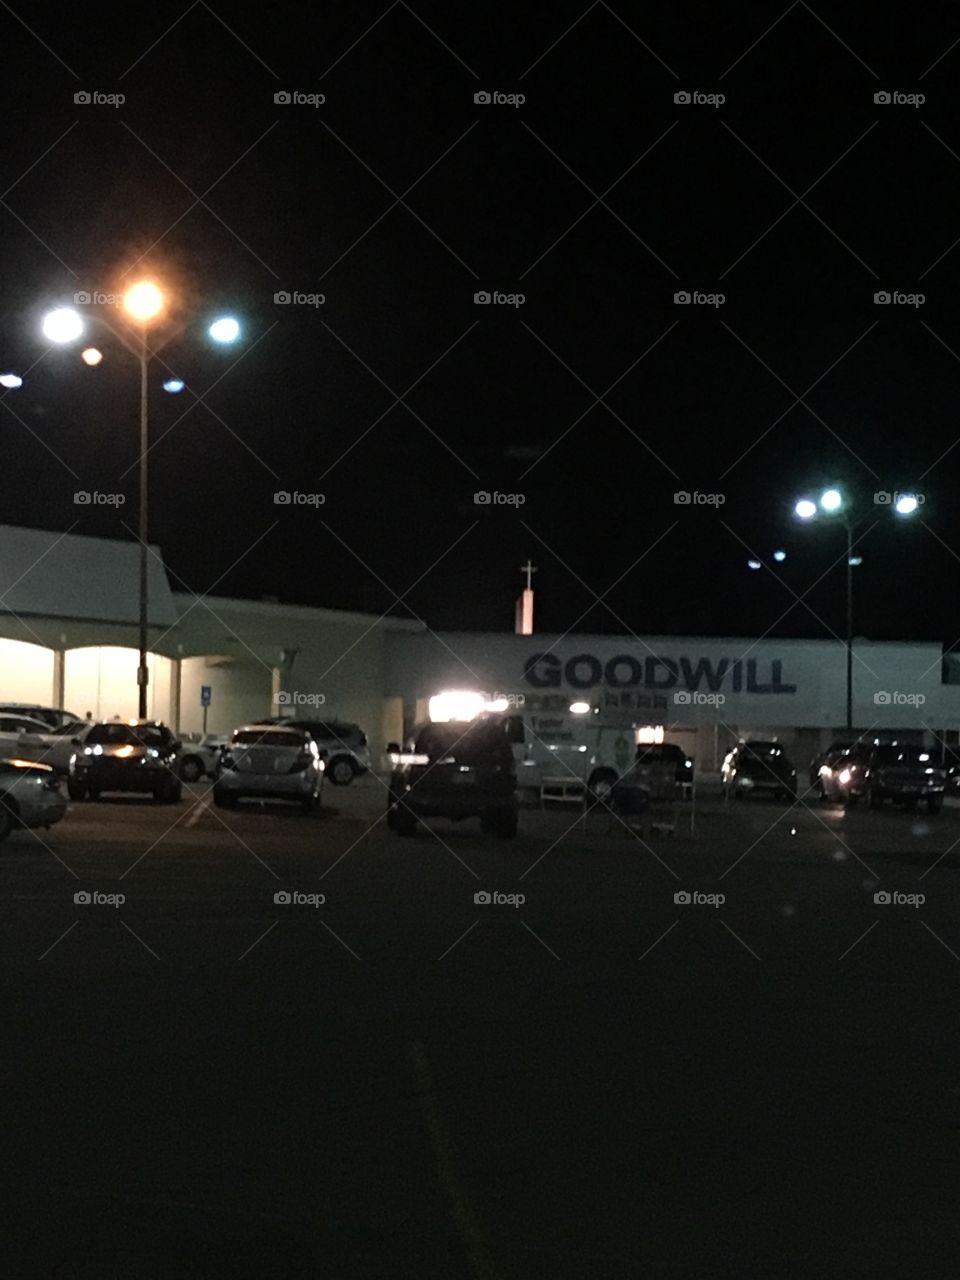 Goodwill and beyond 